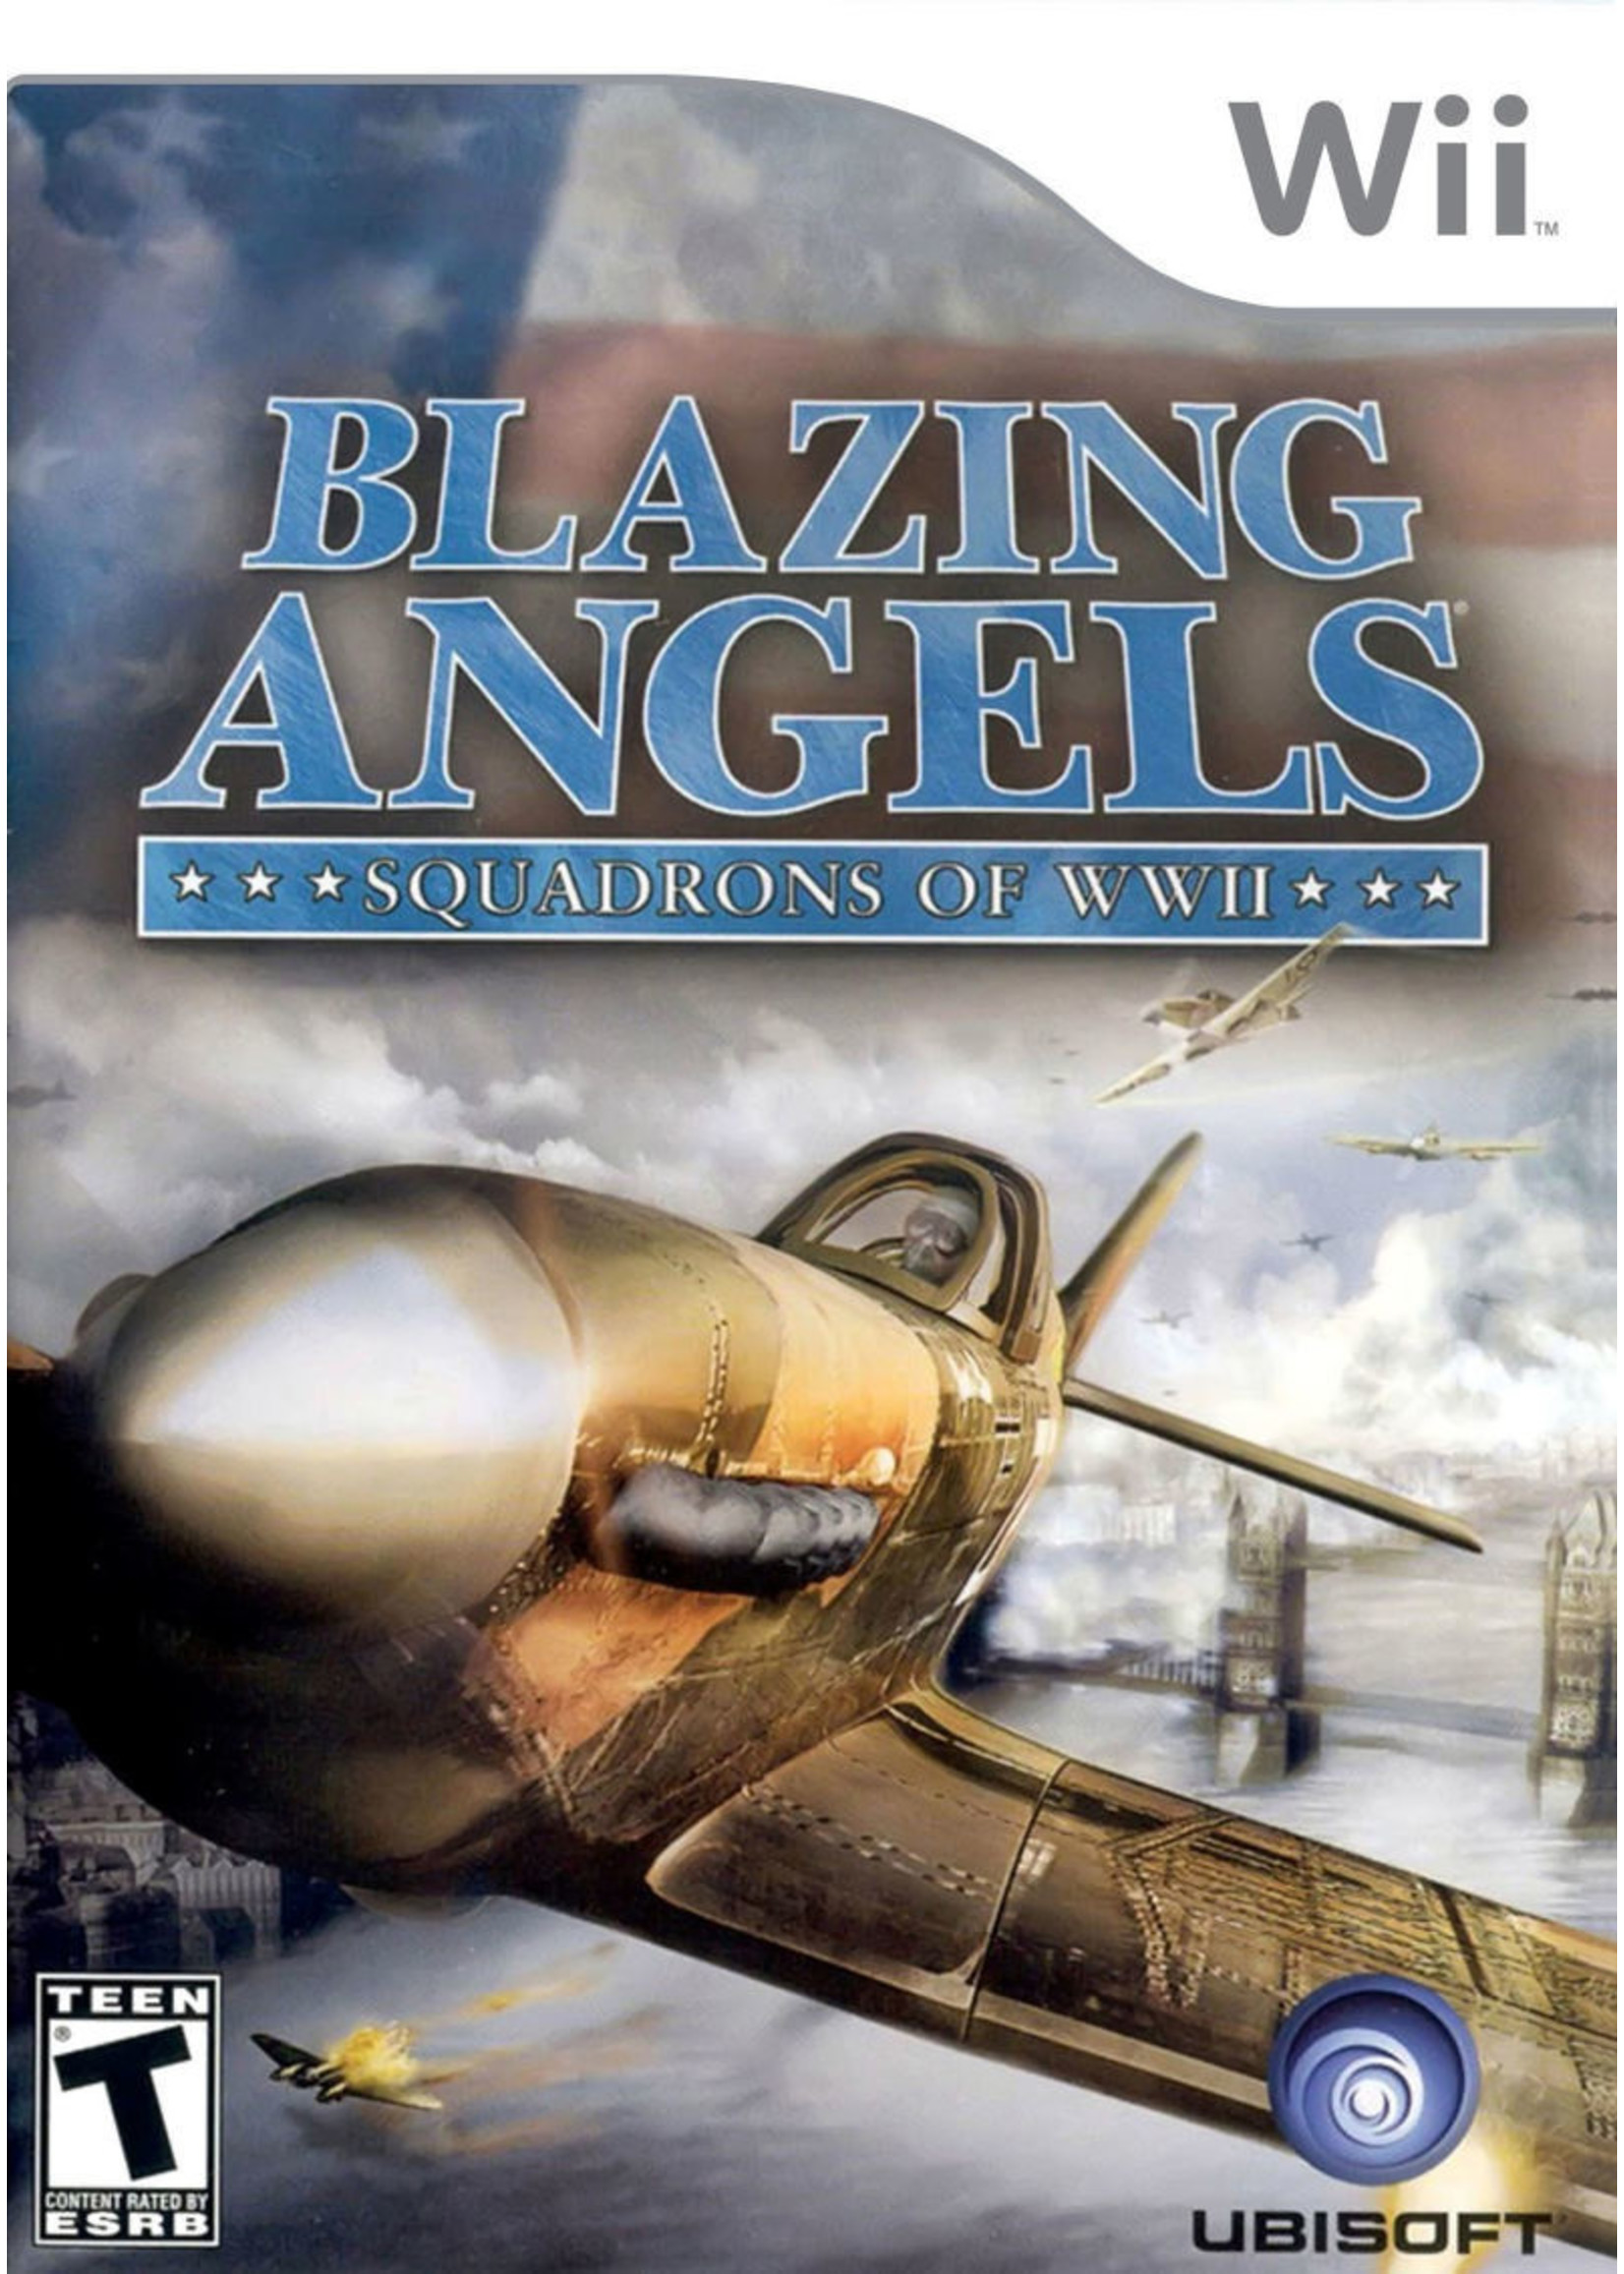 Nintendo Wii Blazing Angels Squadrons of WWII